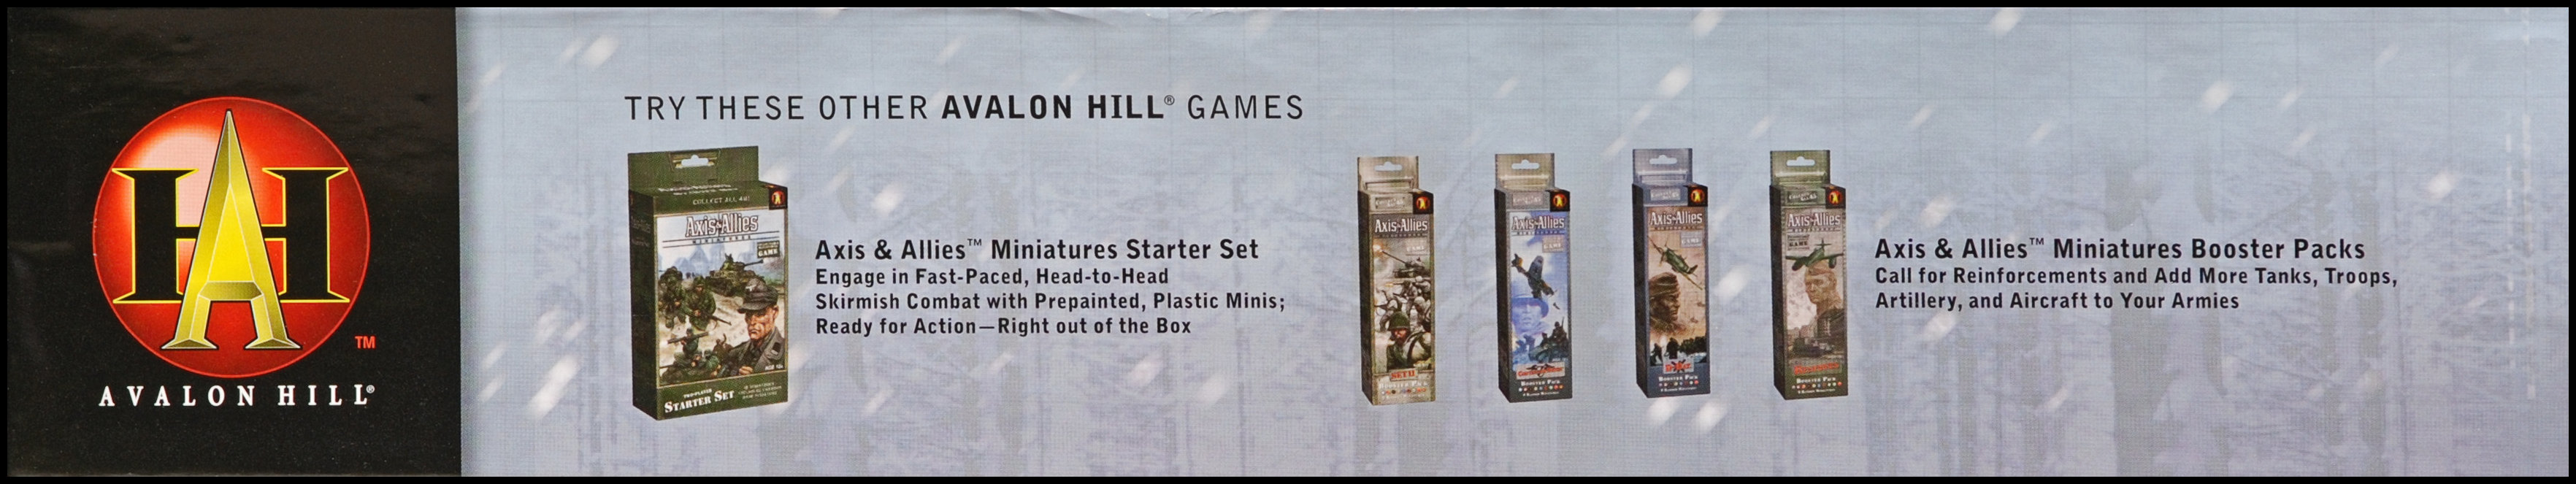 Axis & Allies: Battle Of The Bulge - Inner Box Side 1